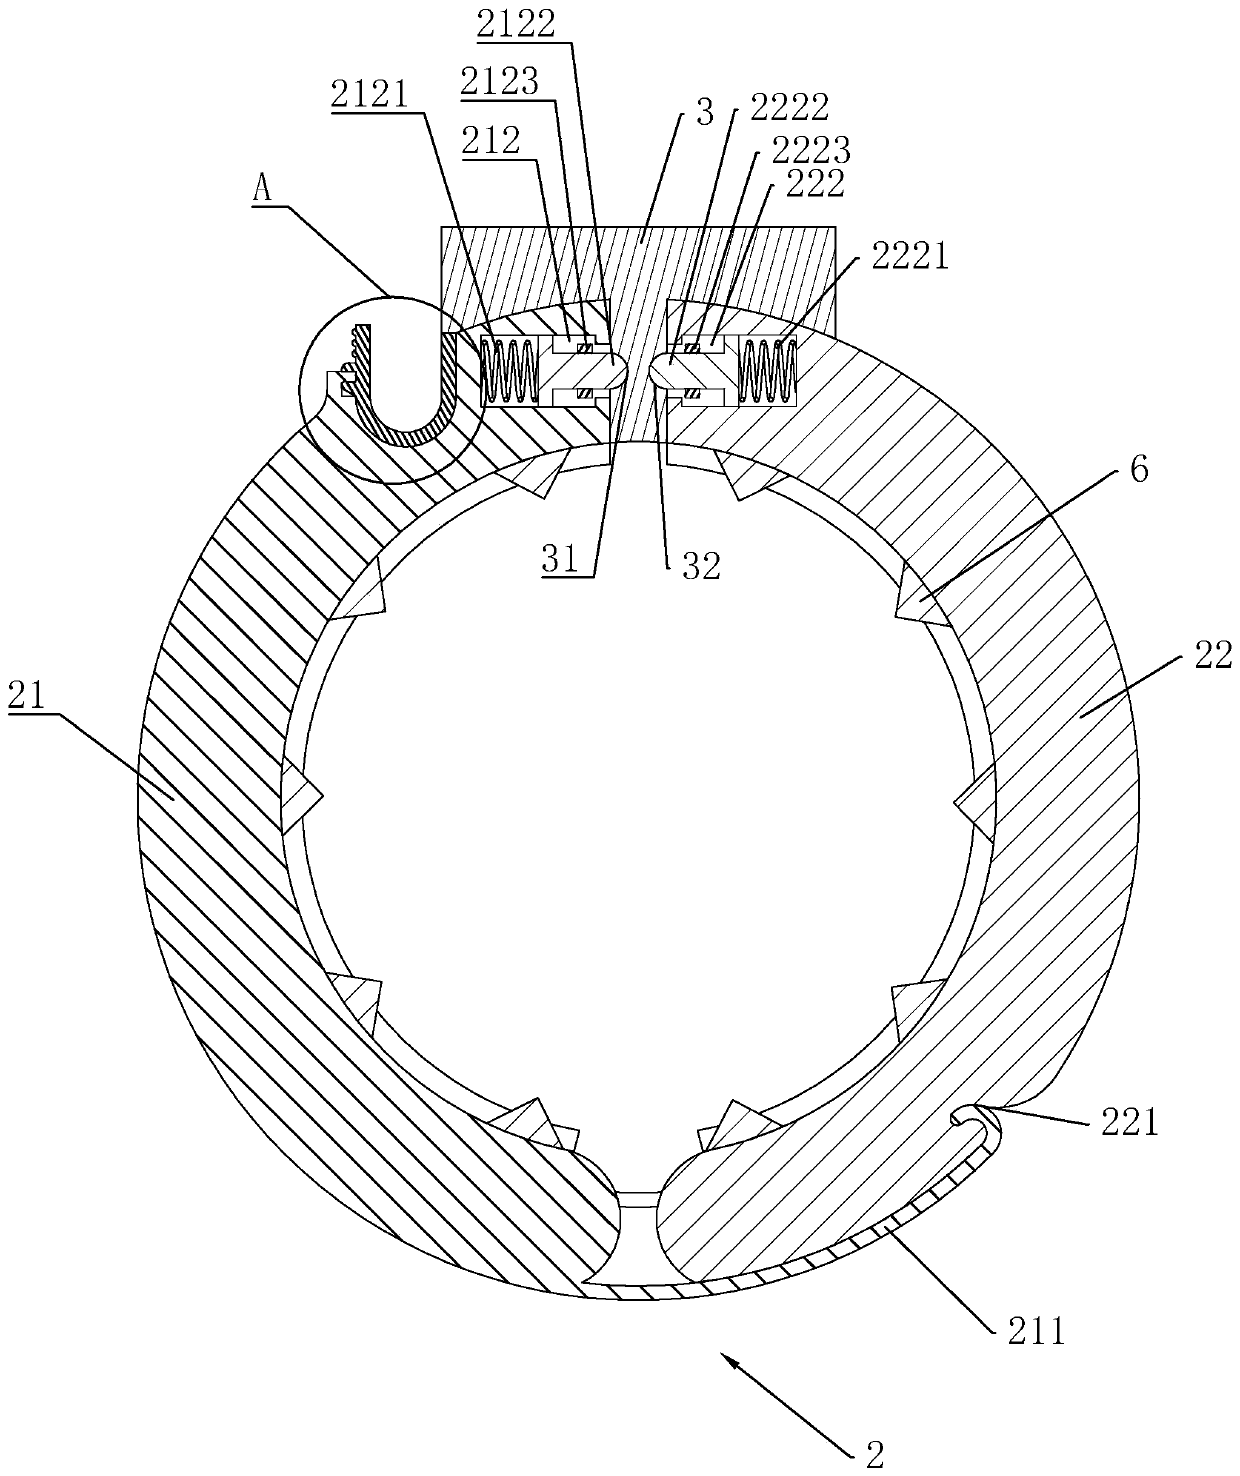 Direct buried cable laying method and special cable protection sleeve for the method